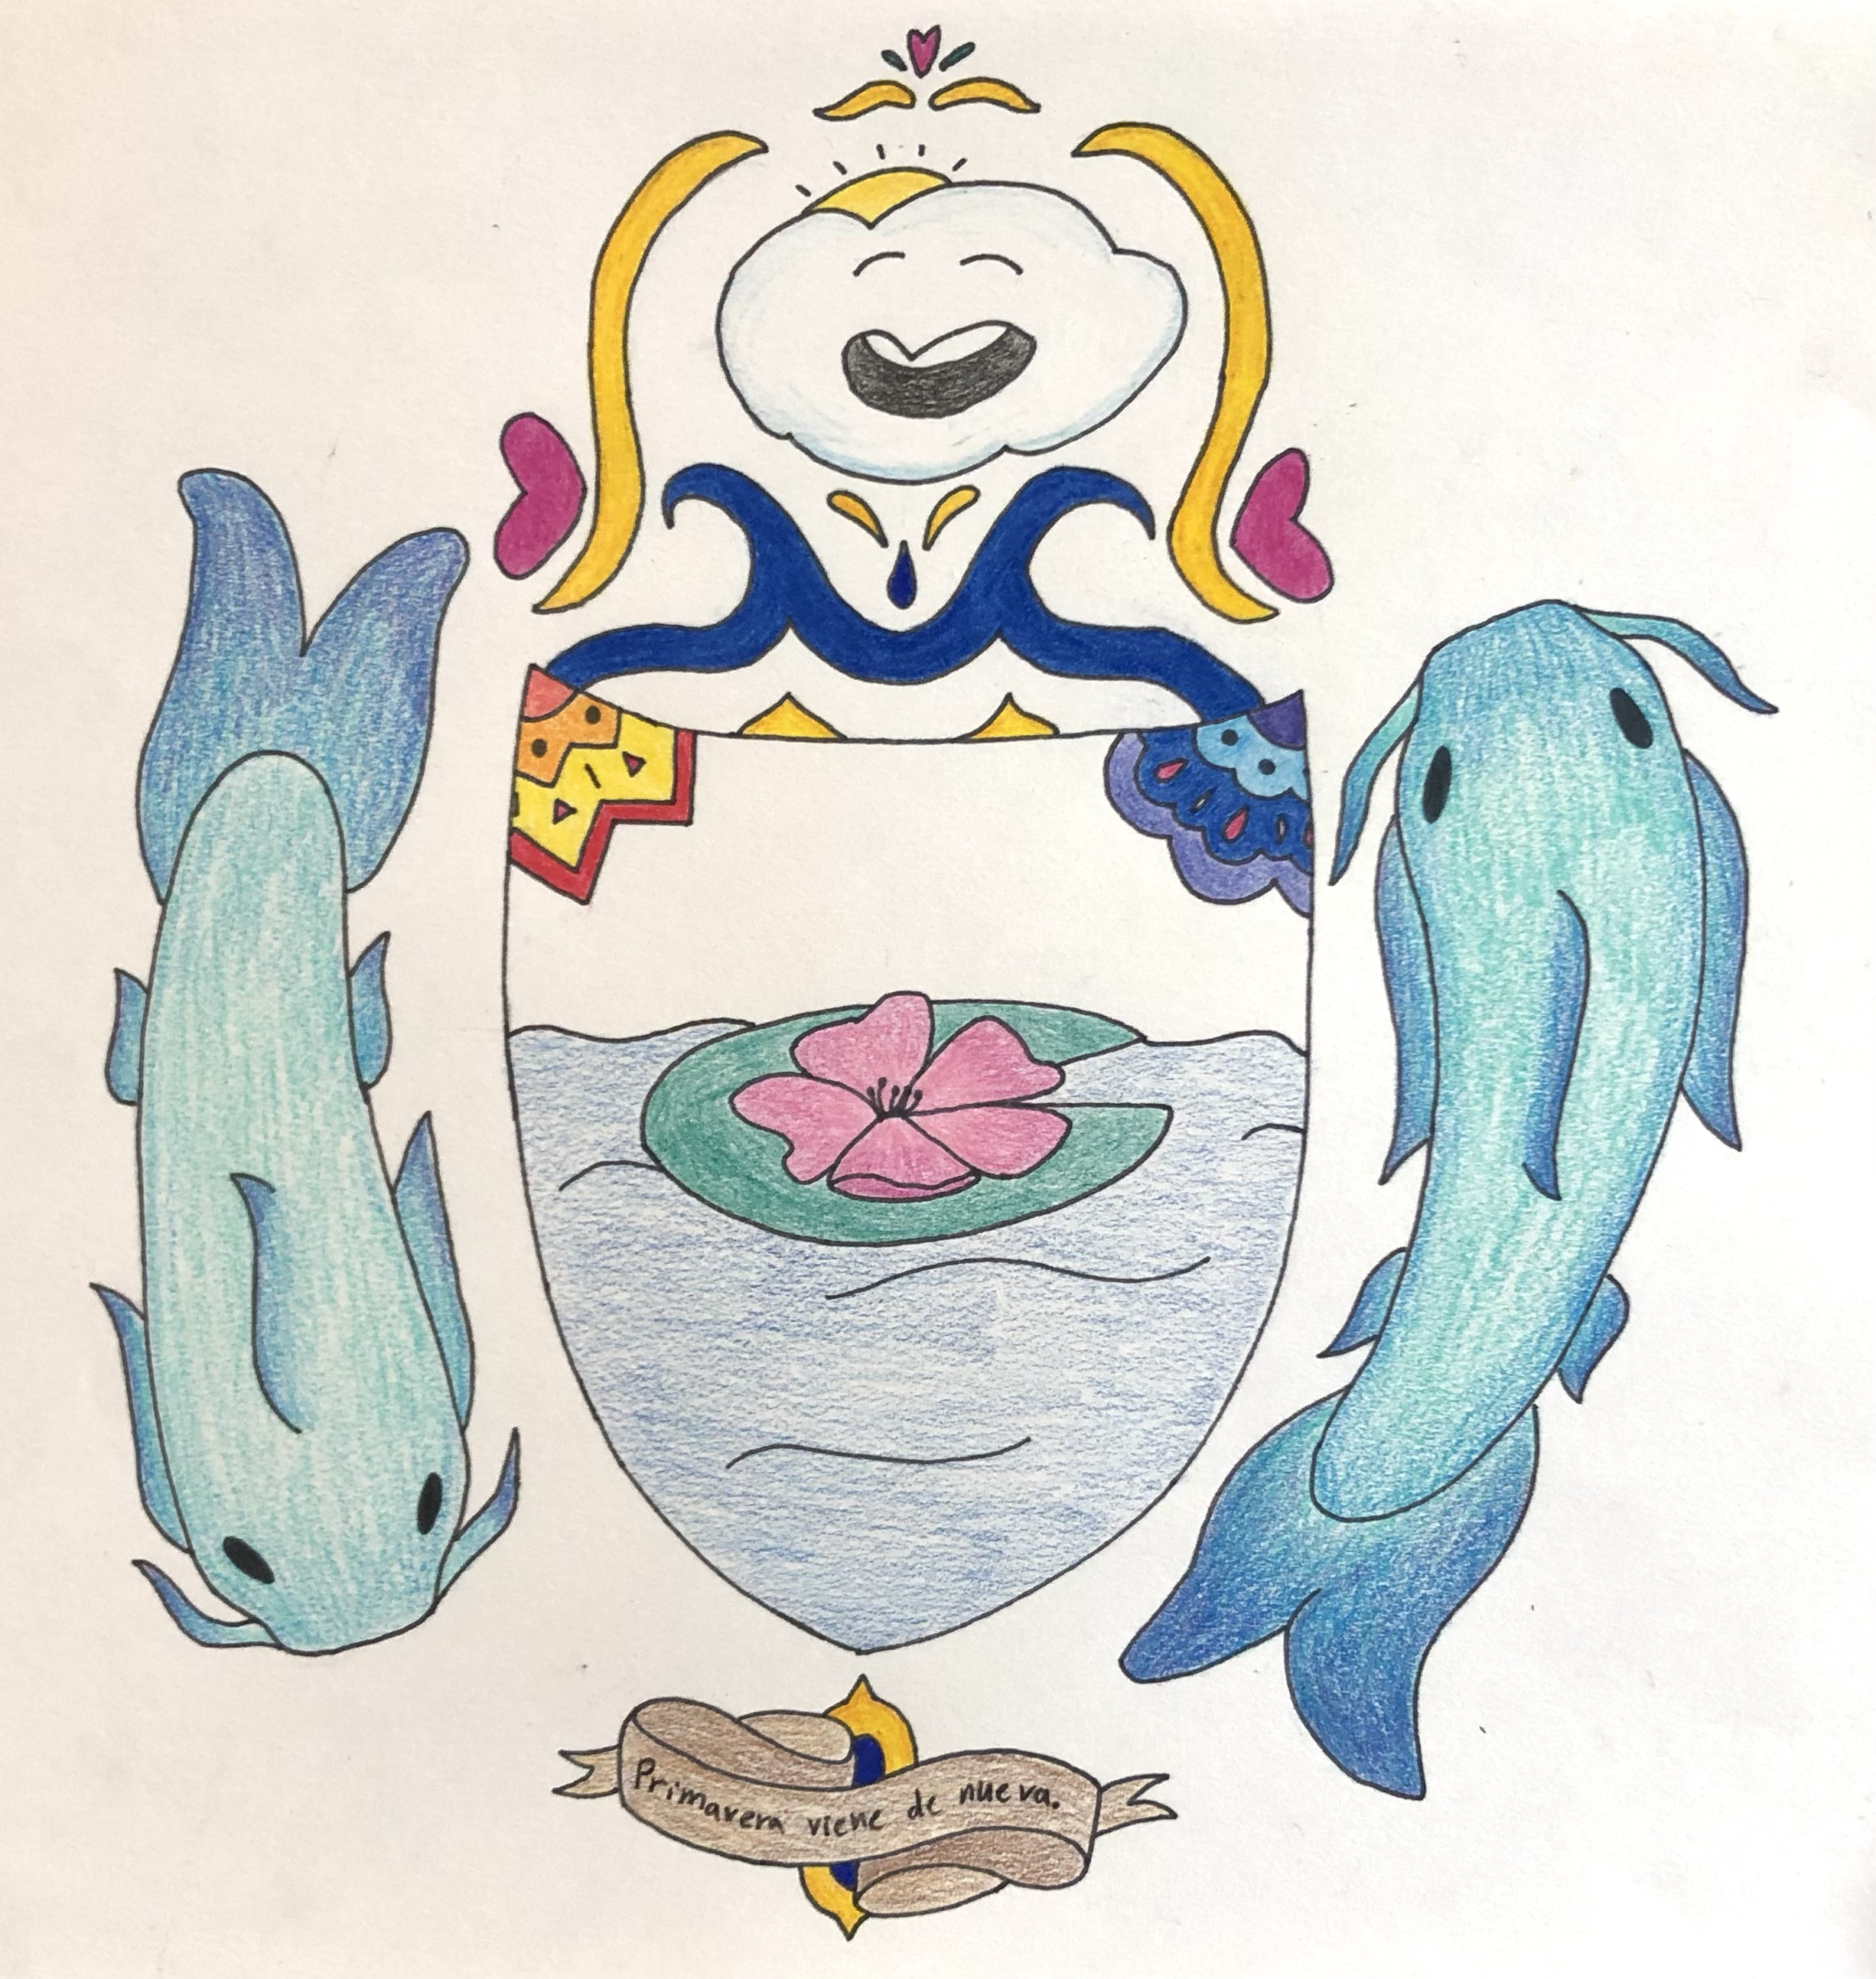 a colored pencil coat of arms with two coi fish swimming around it, on the sheild is a drawing of a lily pad, and below it are the words 'Primavera viene de nueva'